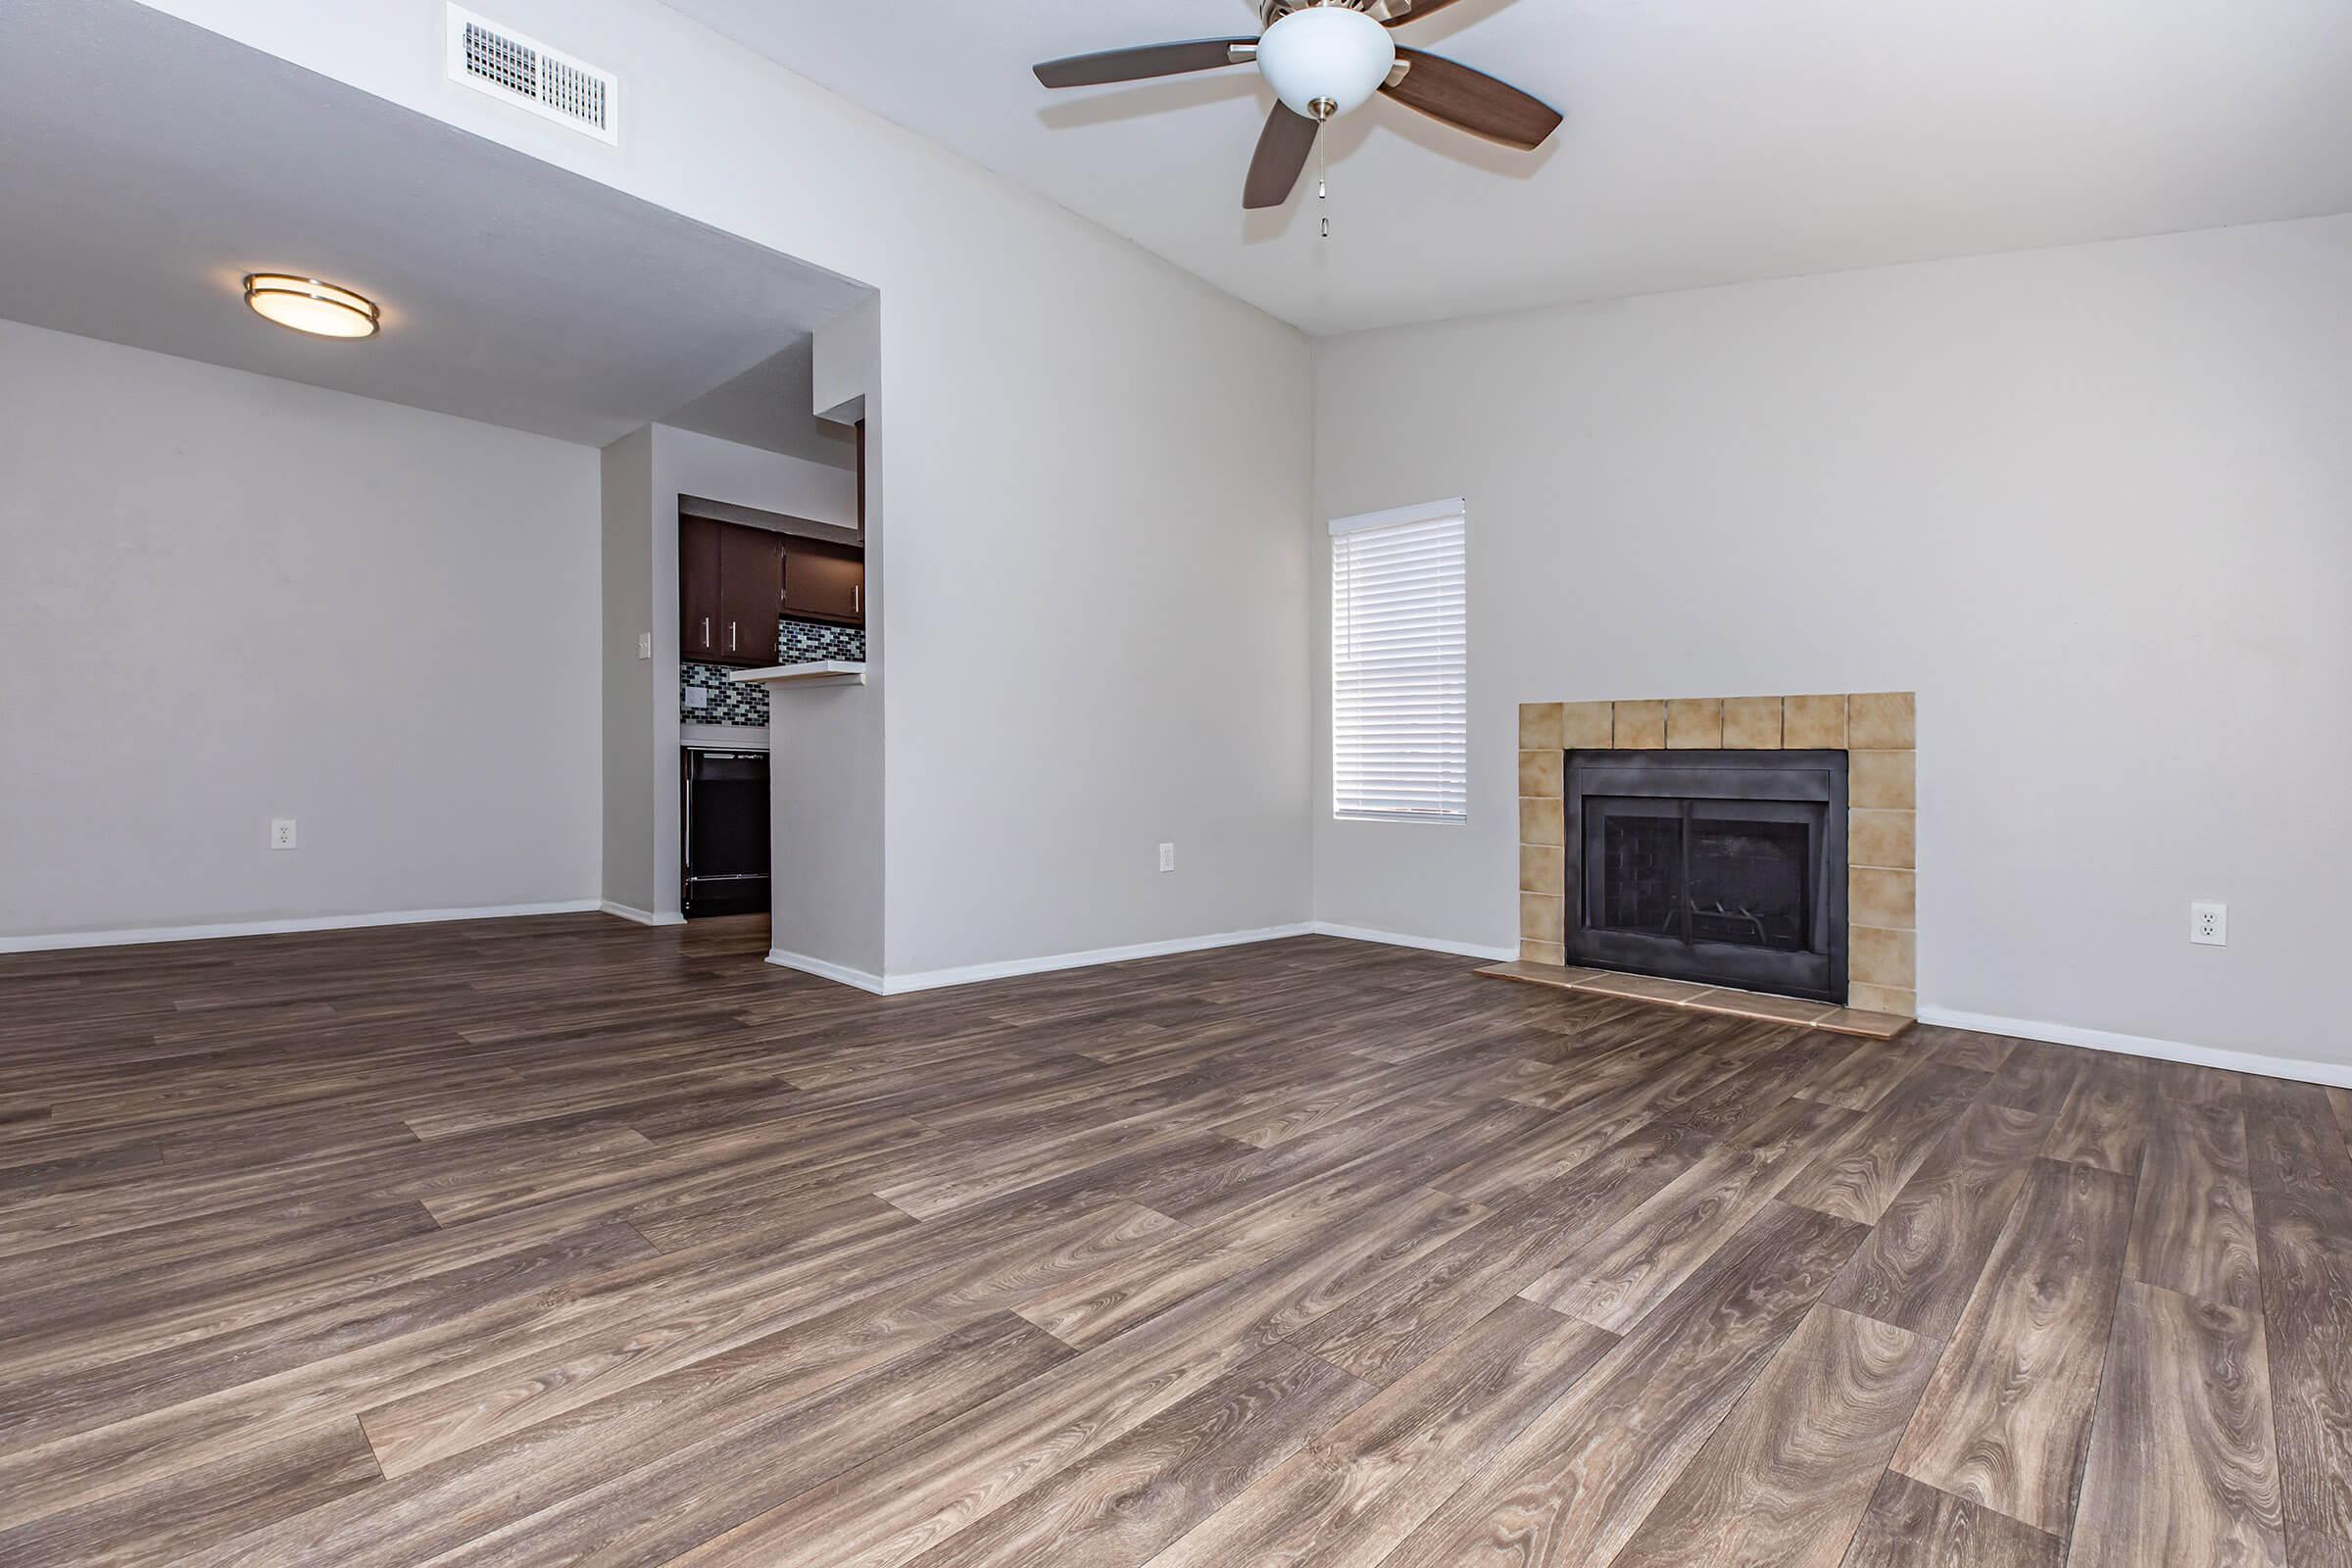 The Park at Summerhill Road wood-style flooring in select Plan C homes